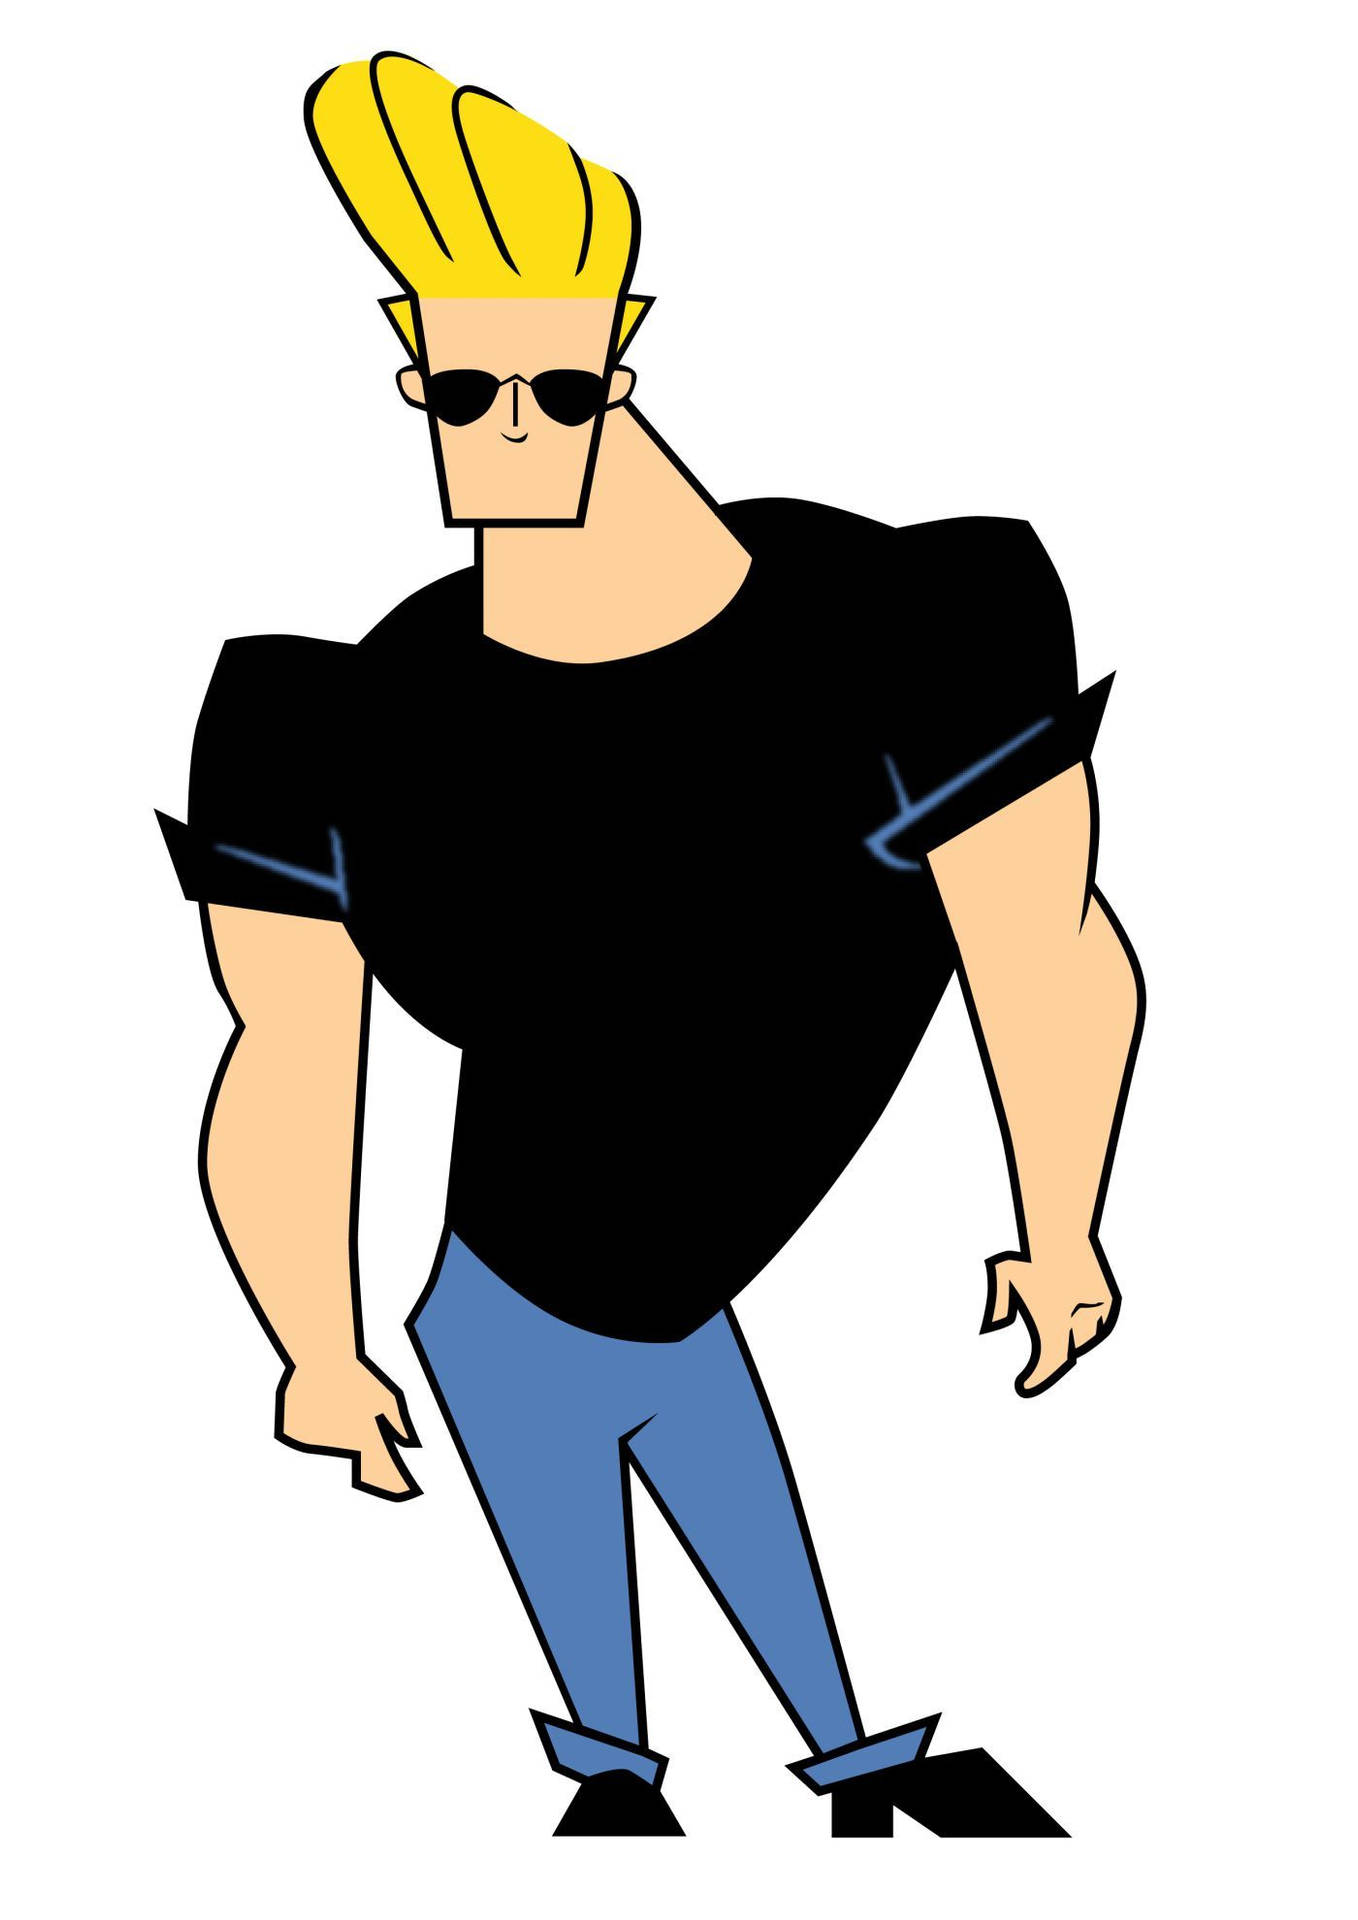 Download Cool Johnny Bravo Flexing Muscles Wallpaper | Wallpapers.com